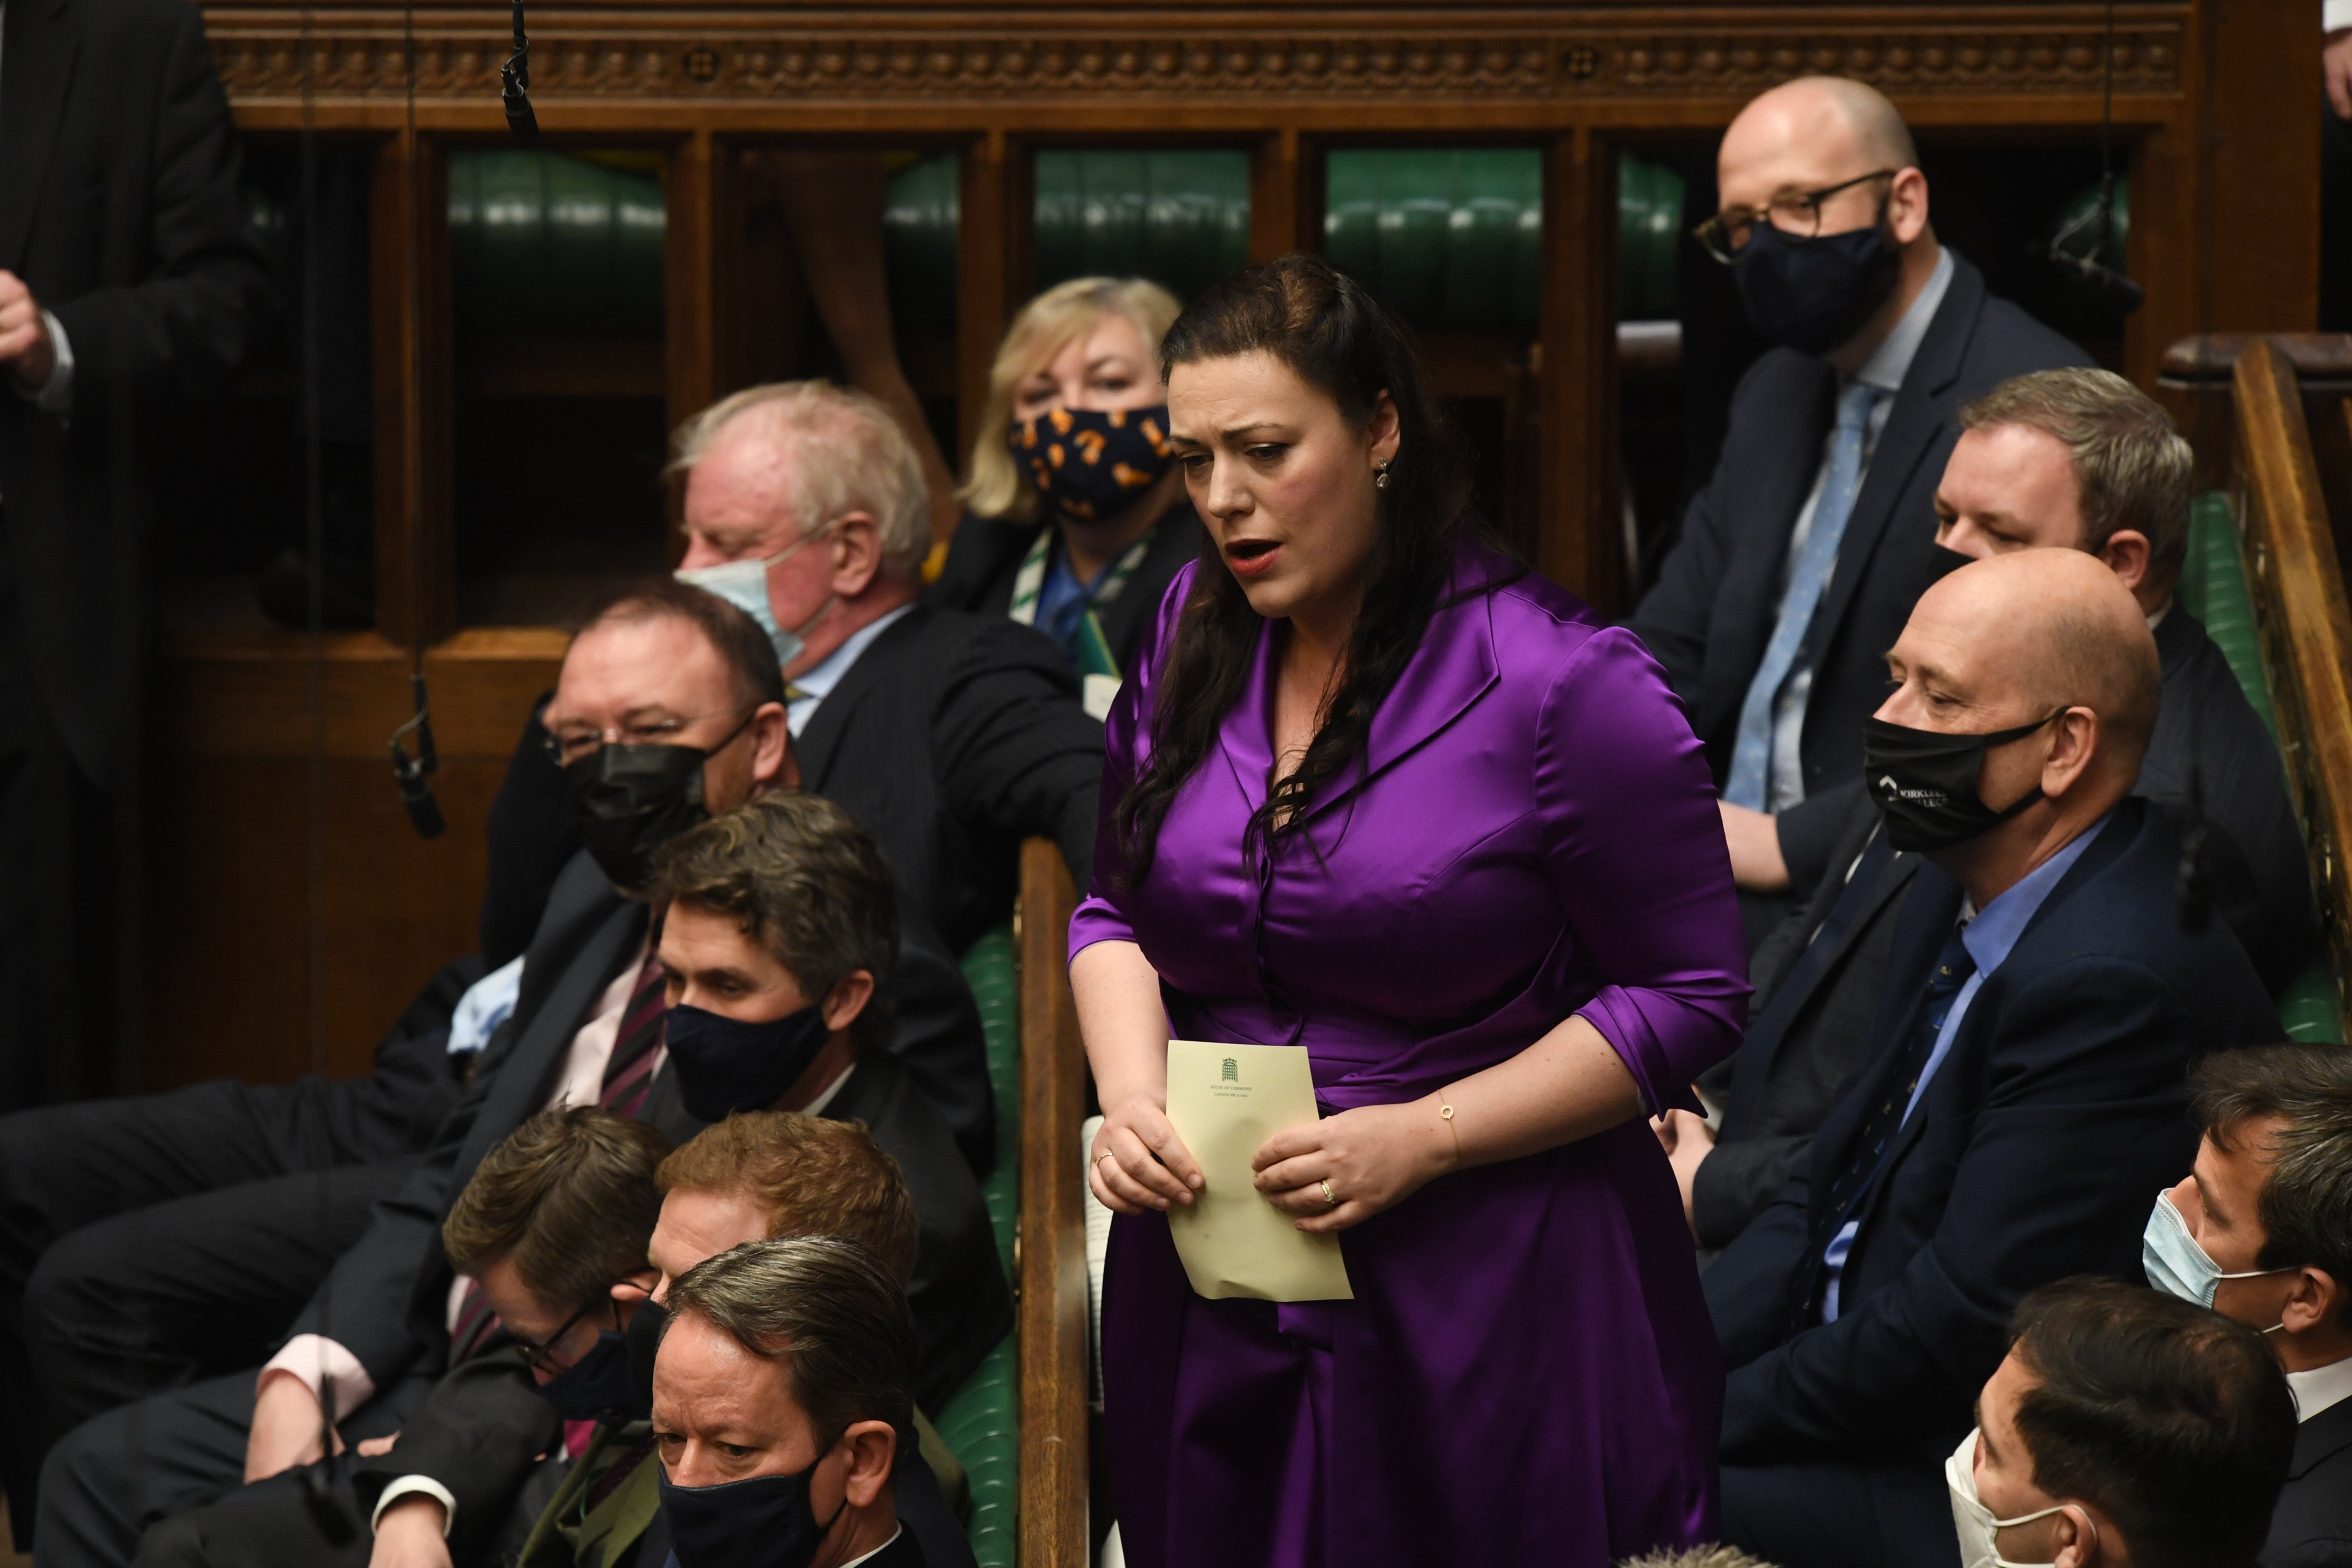 Tory MP Alicia Kearns said it ‘would be a mistake’ to dismiss the by-election results